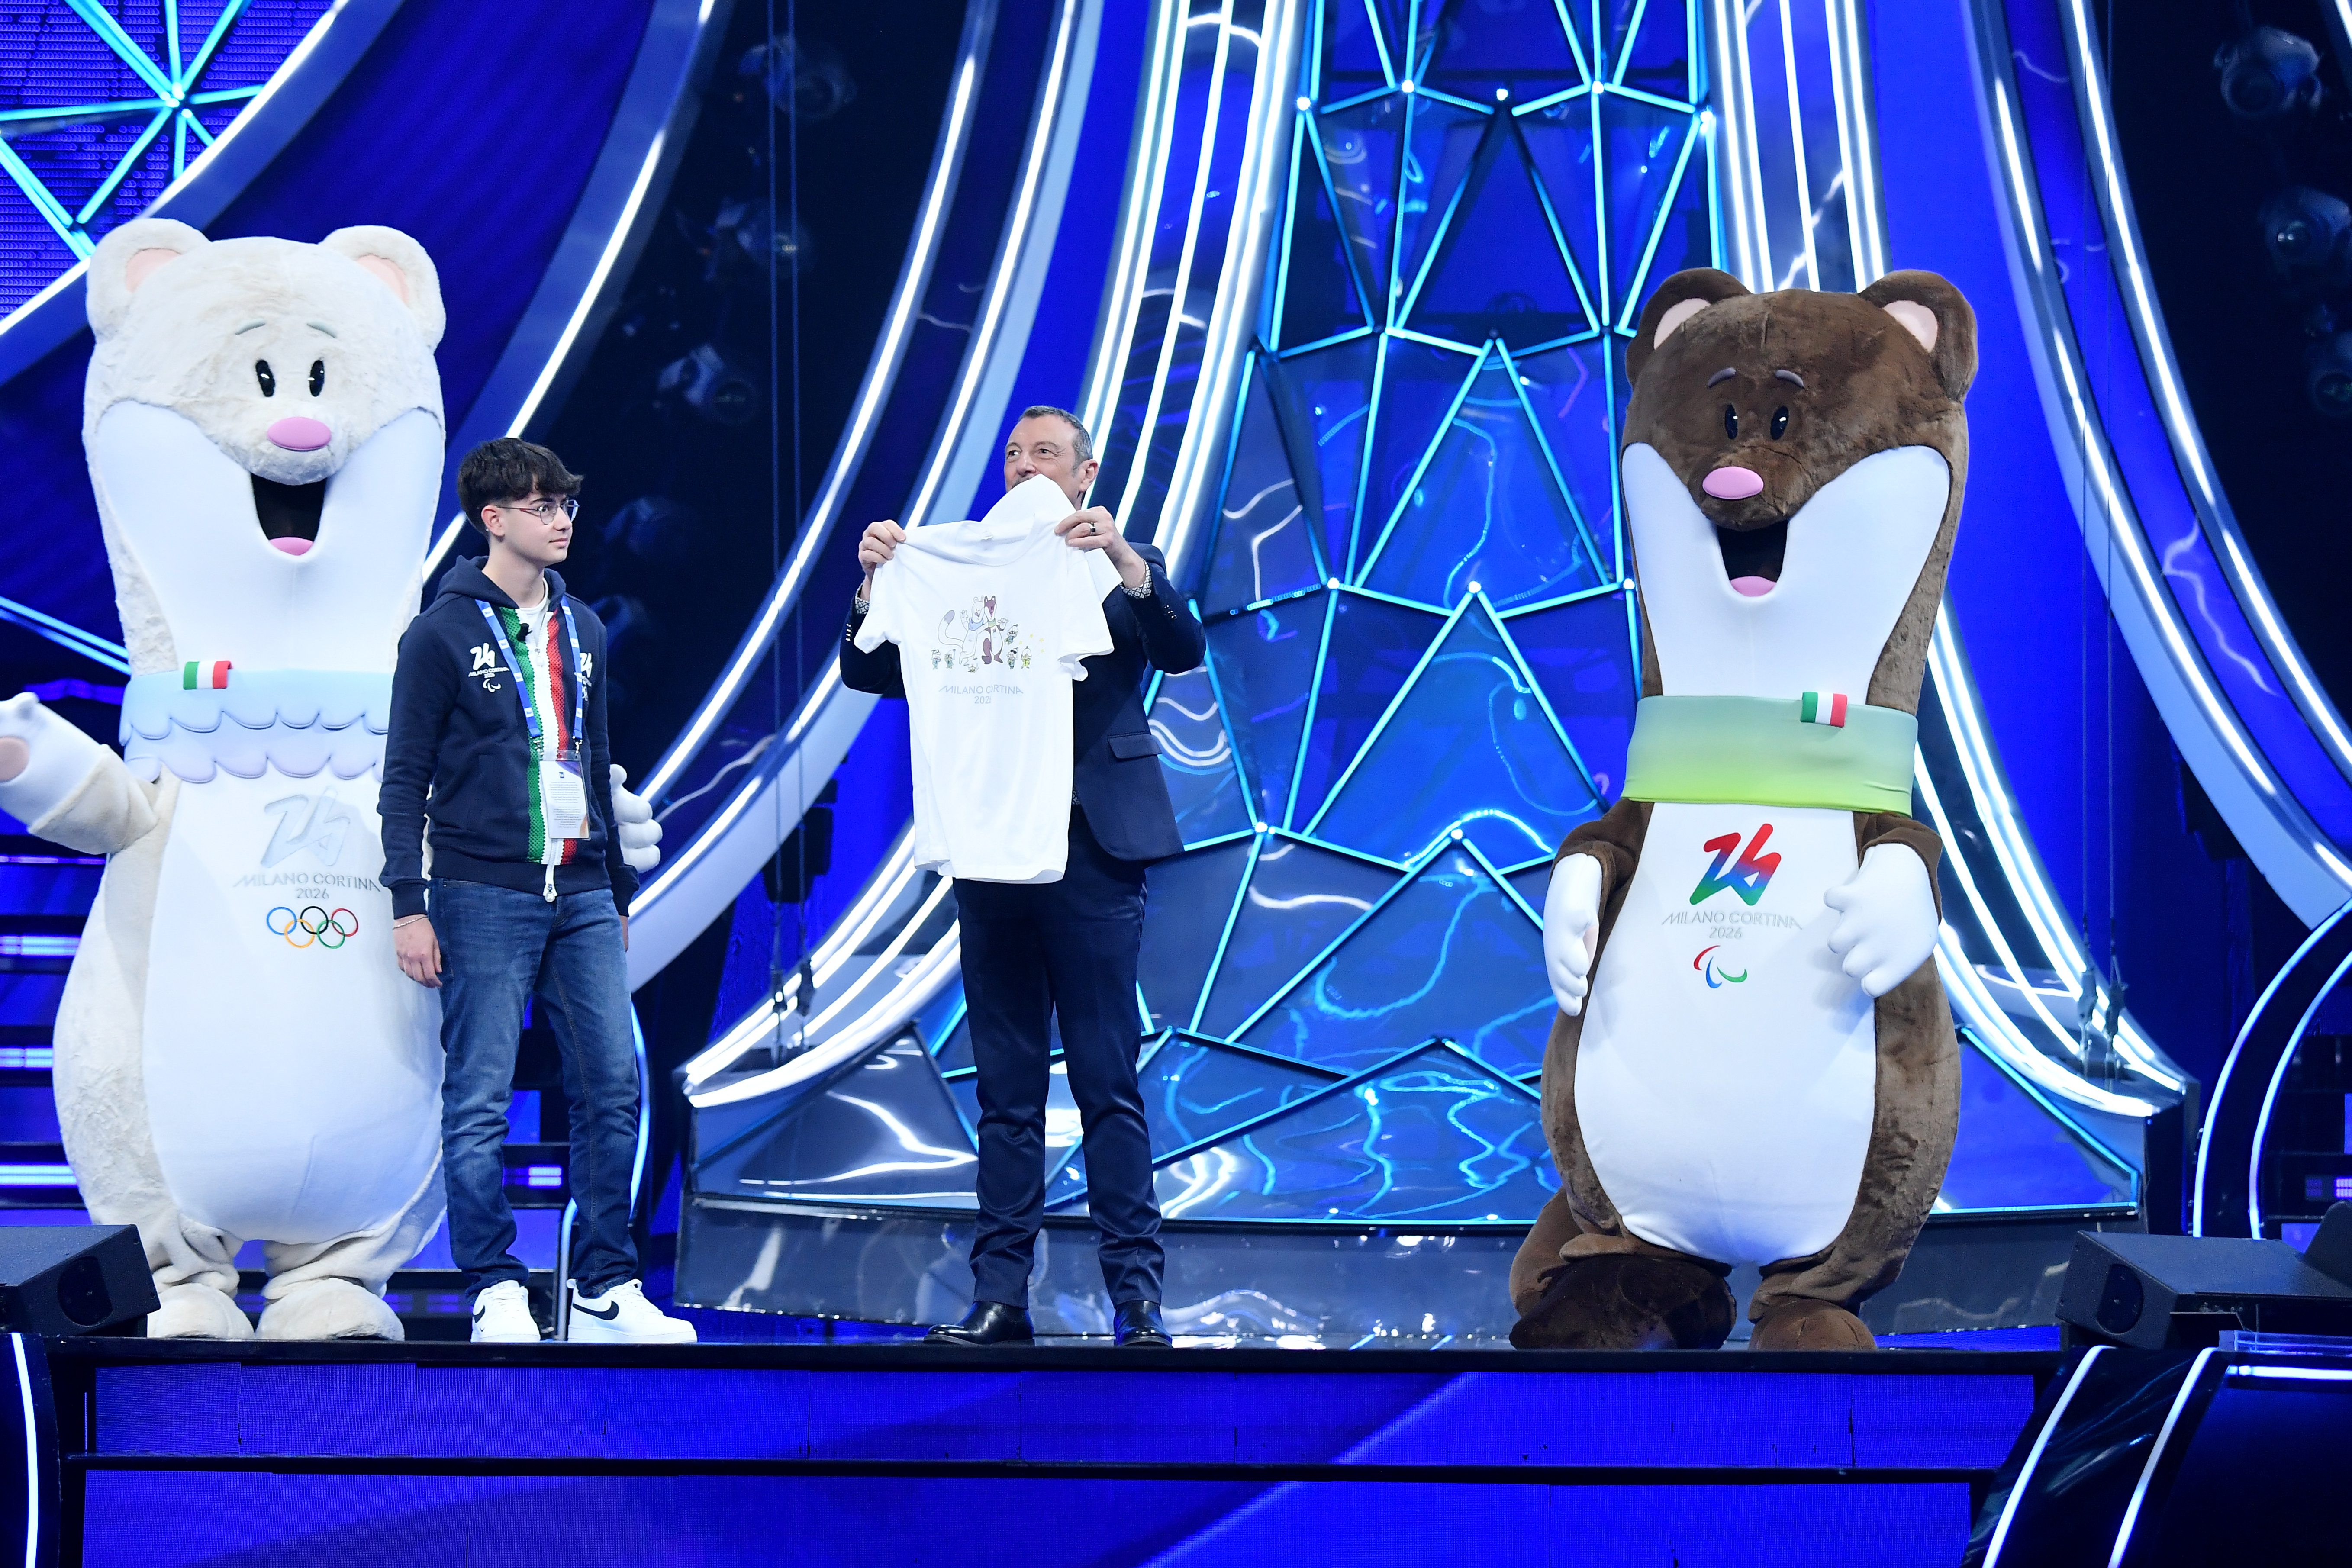 Photos of the Sanremo stage with the Mascots, Amadeus and the boy who drew the mascots